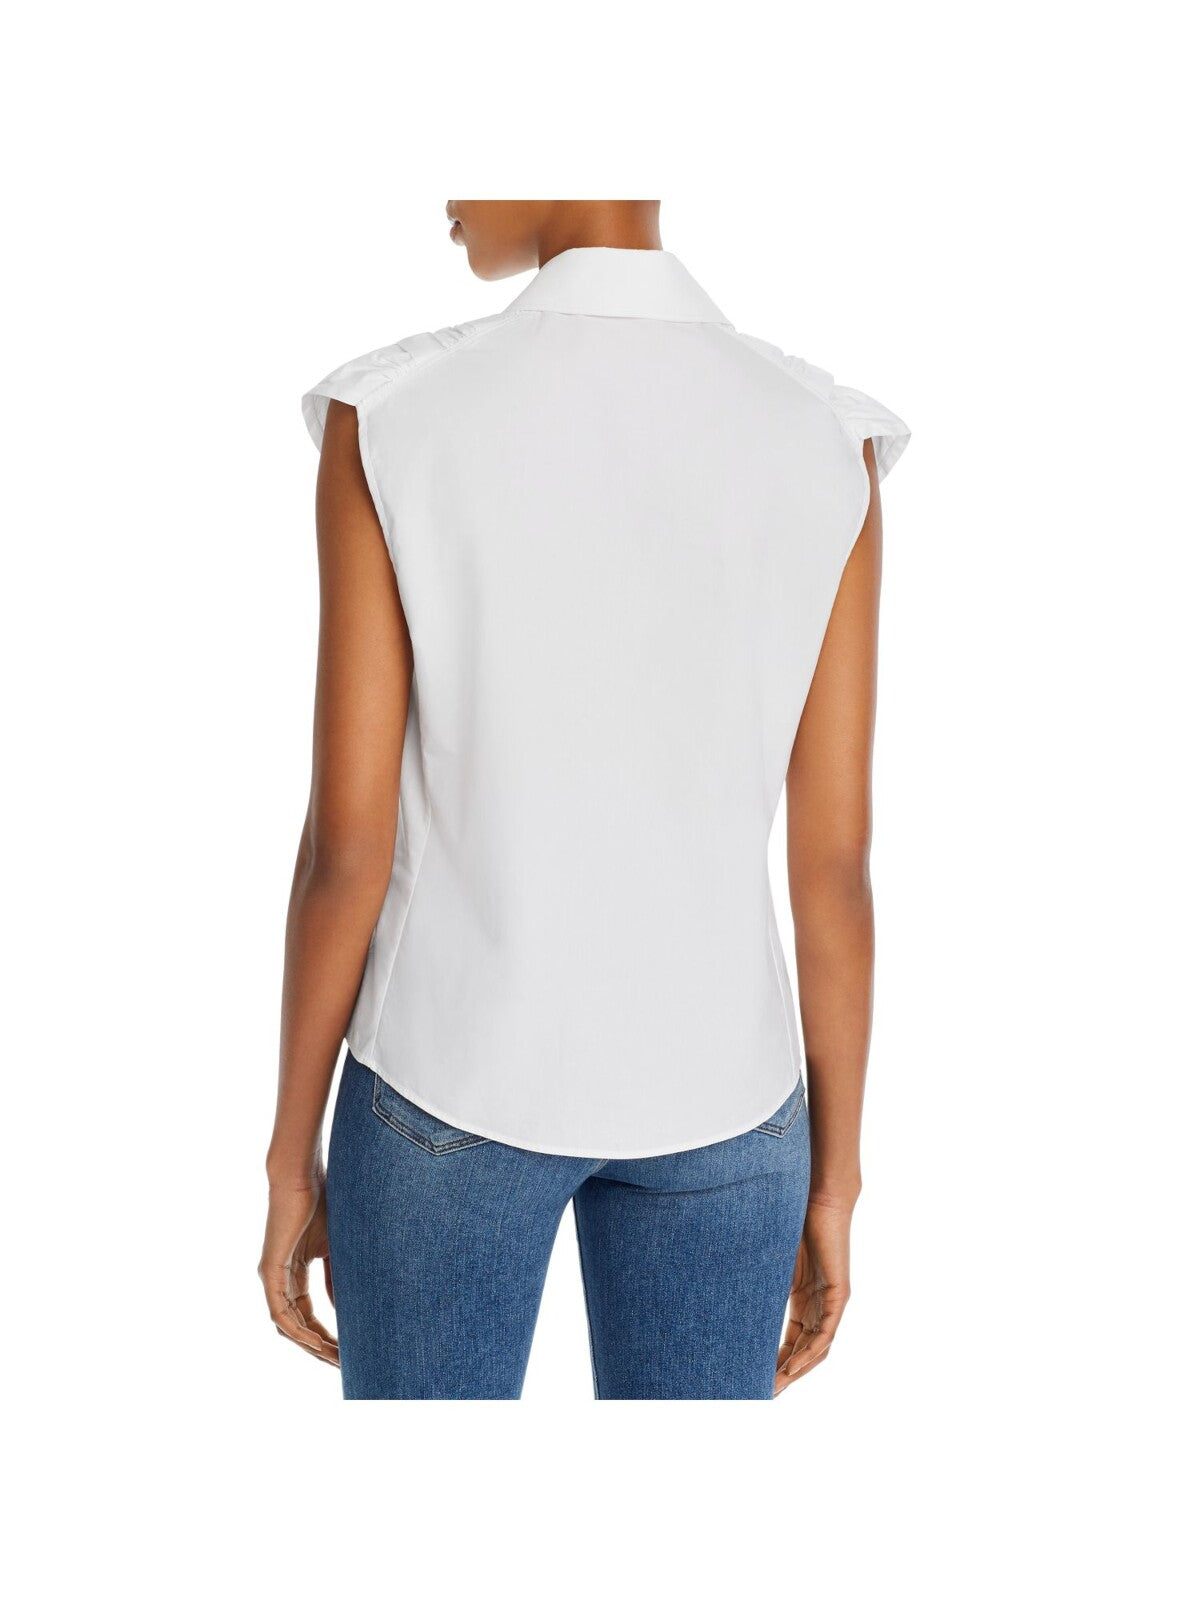 SEE BY CHLOE Womens White Ruched Cap Sleeve Collared Top 36